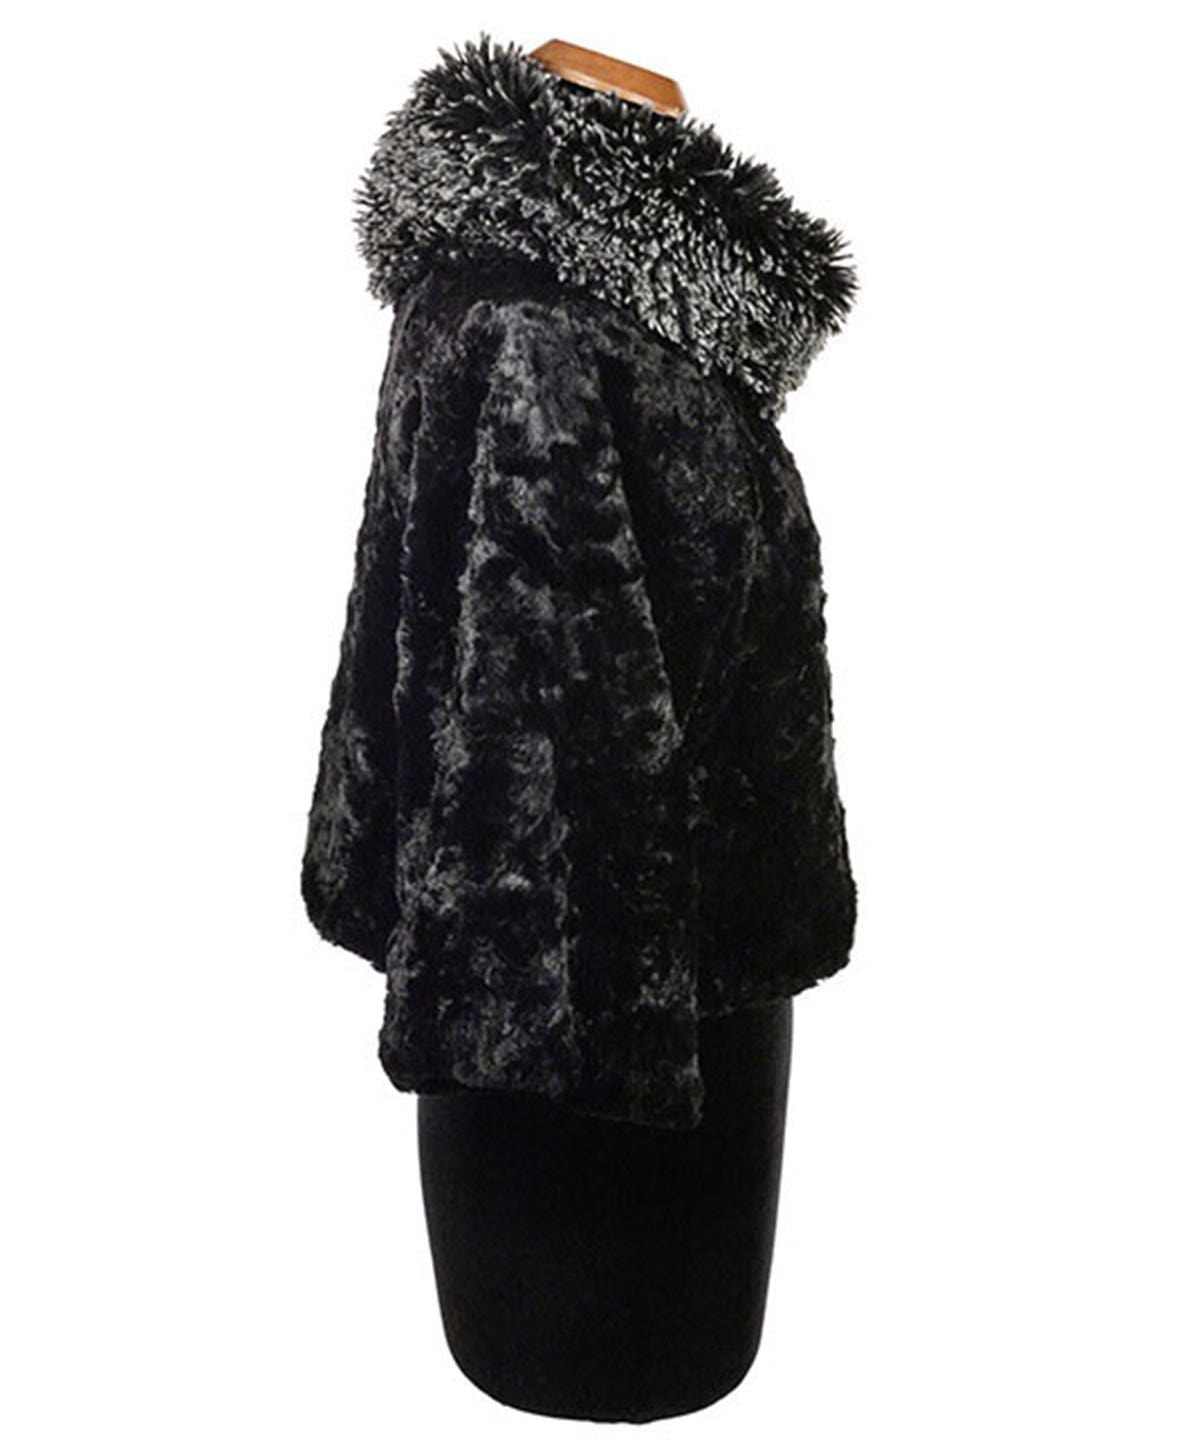 Side view Sweater Top | Cuddly Faux Fur  Black with Silver Tip Fox in Black Faux Fur Long Hair Collar | Handmade By Pandemonium Millinery | Seattle WA USA